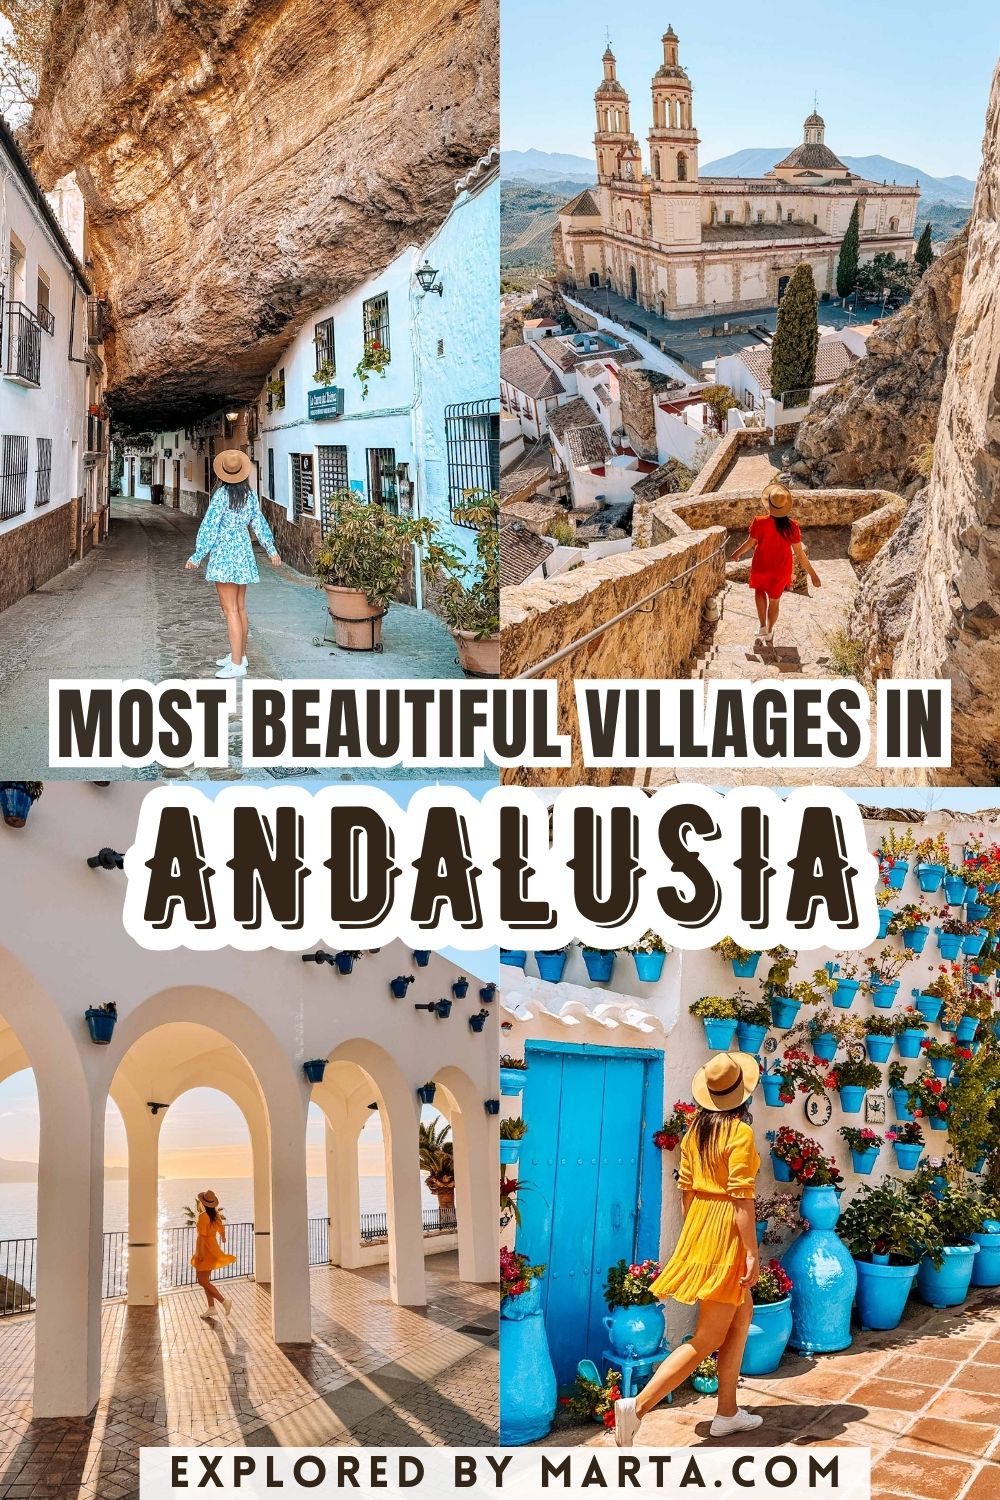 The most beautiful whitewashed villages and unique towns in Andalusia, Spain